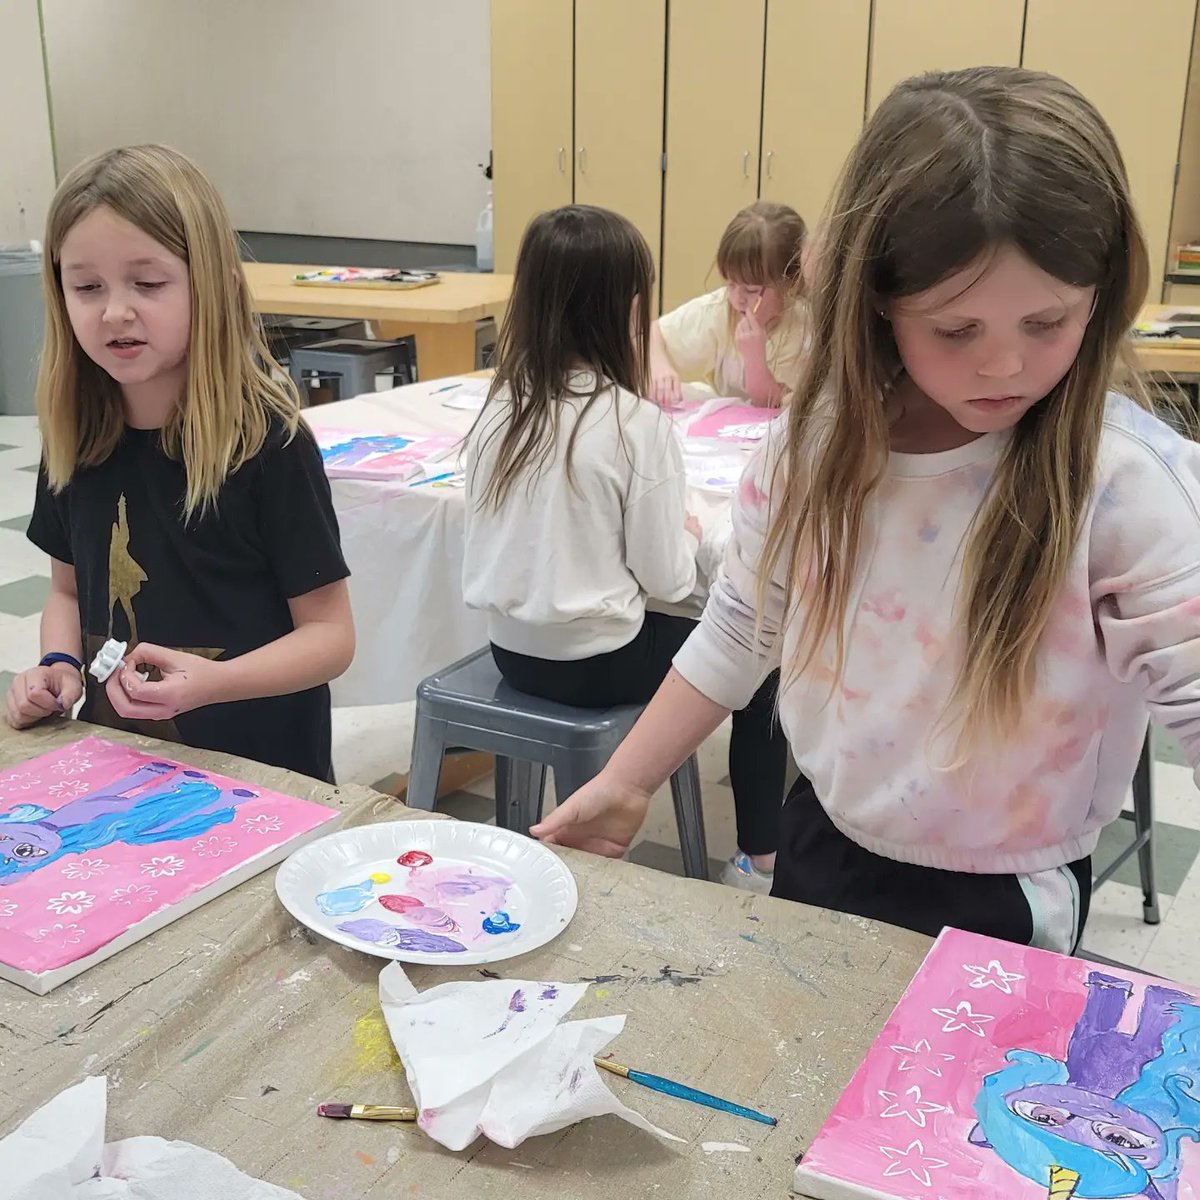 Today we had fun painting characters from our Pony Squad. Look at our cute energetic Izzy Moonbow Unicorns from our friends at Stonegate Elementary!
#firststartcs #firststartartstudio #stonegateelementary #zvillemoms #zionsvilleindiana